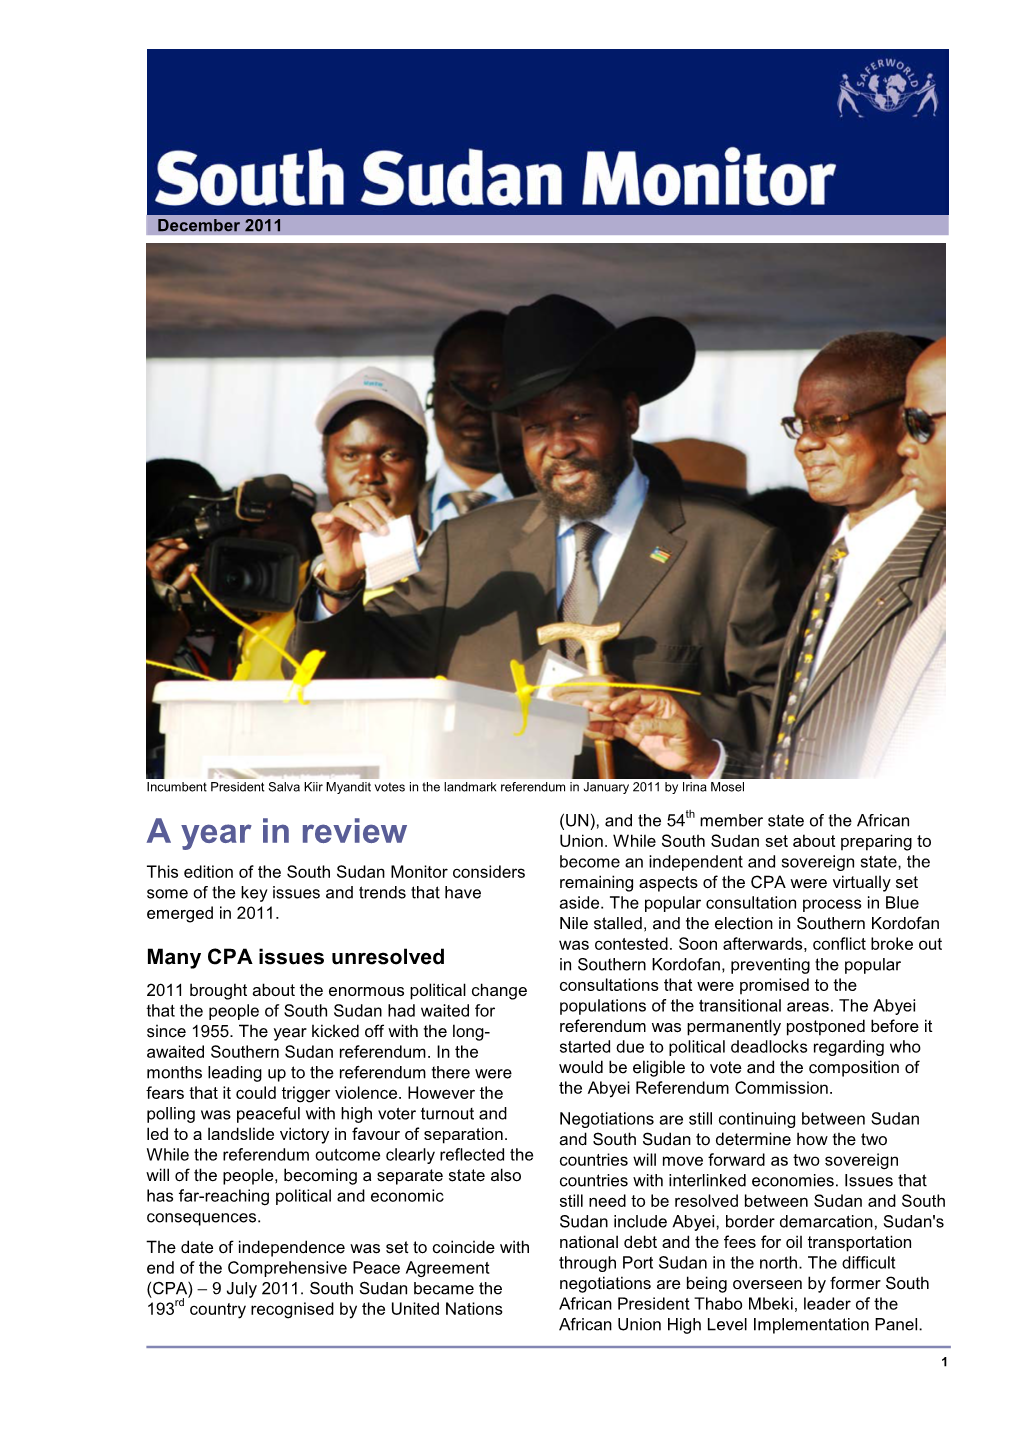 South Sudan Monitor Considers Remaining Aspects of the CPA Were Virtually Set Some of the Key Issues and Trends That Have Aside